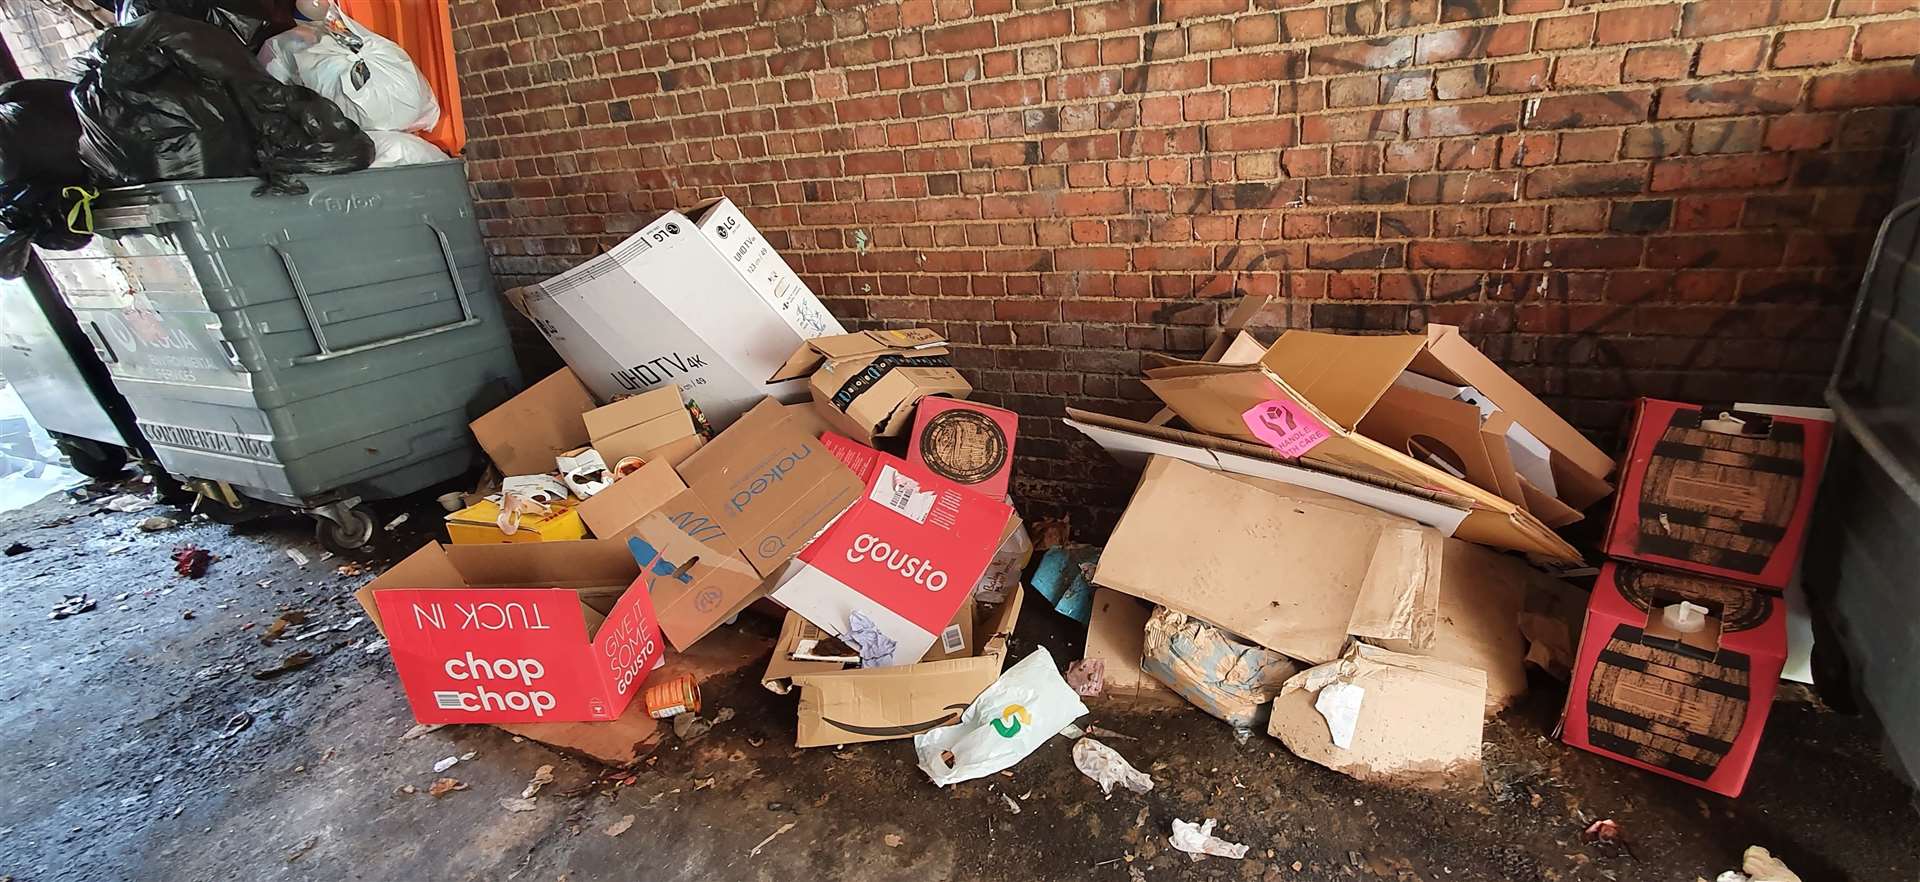 During lockdown, the Wetherspoon bins were overflowing and there was also fly-tipping Picture: Chris Stevenson